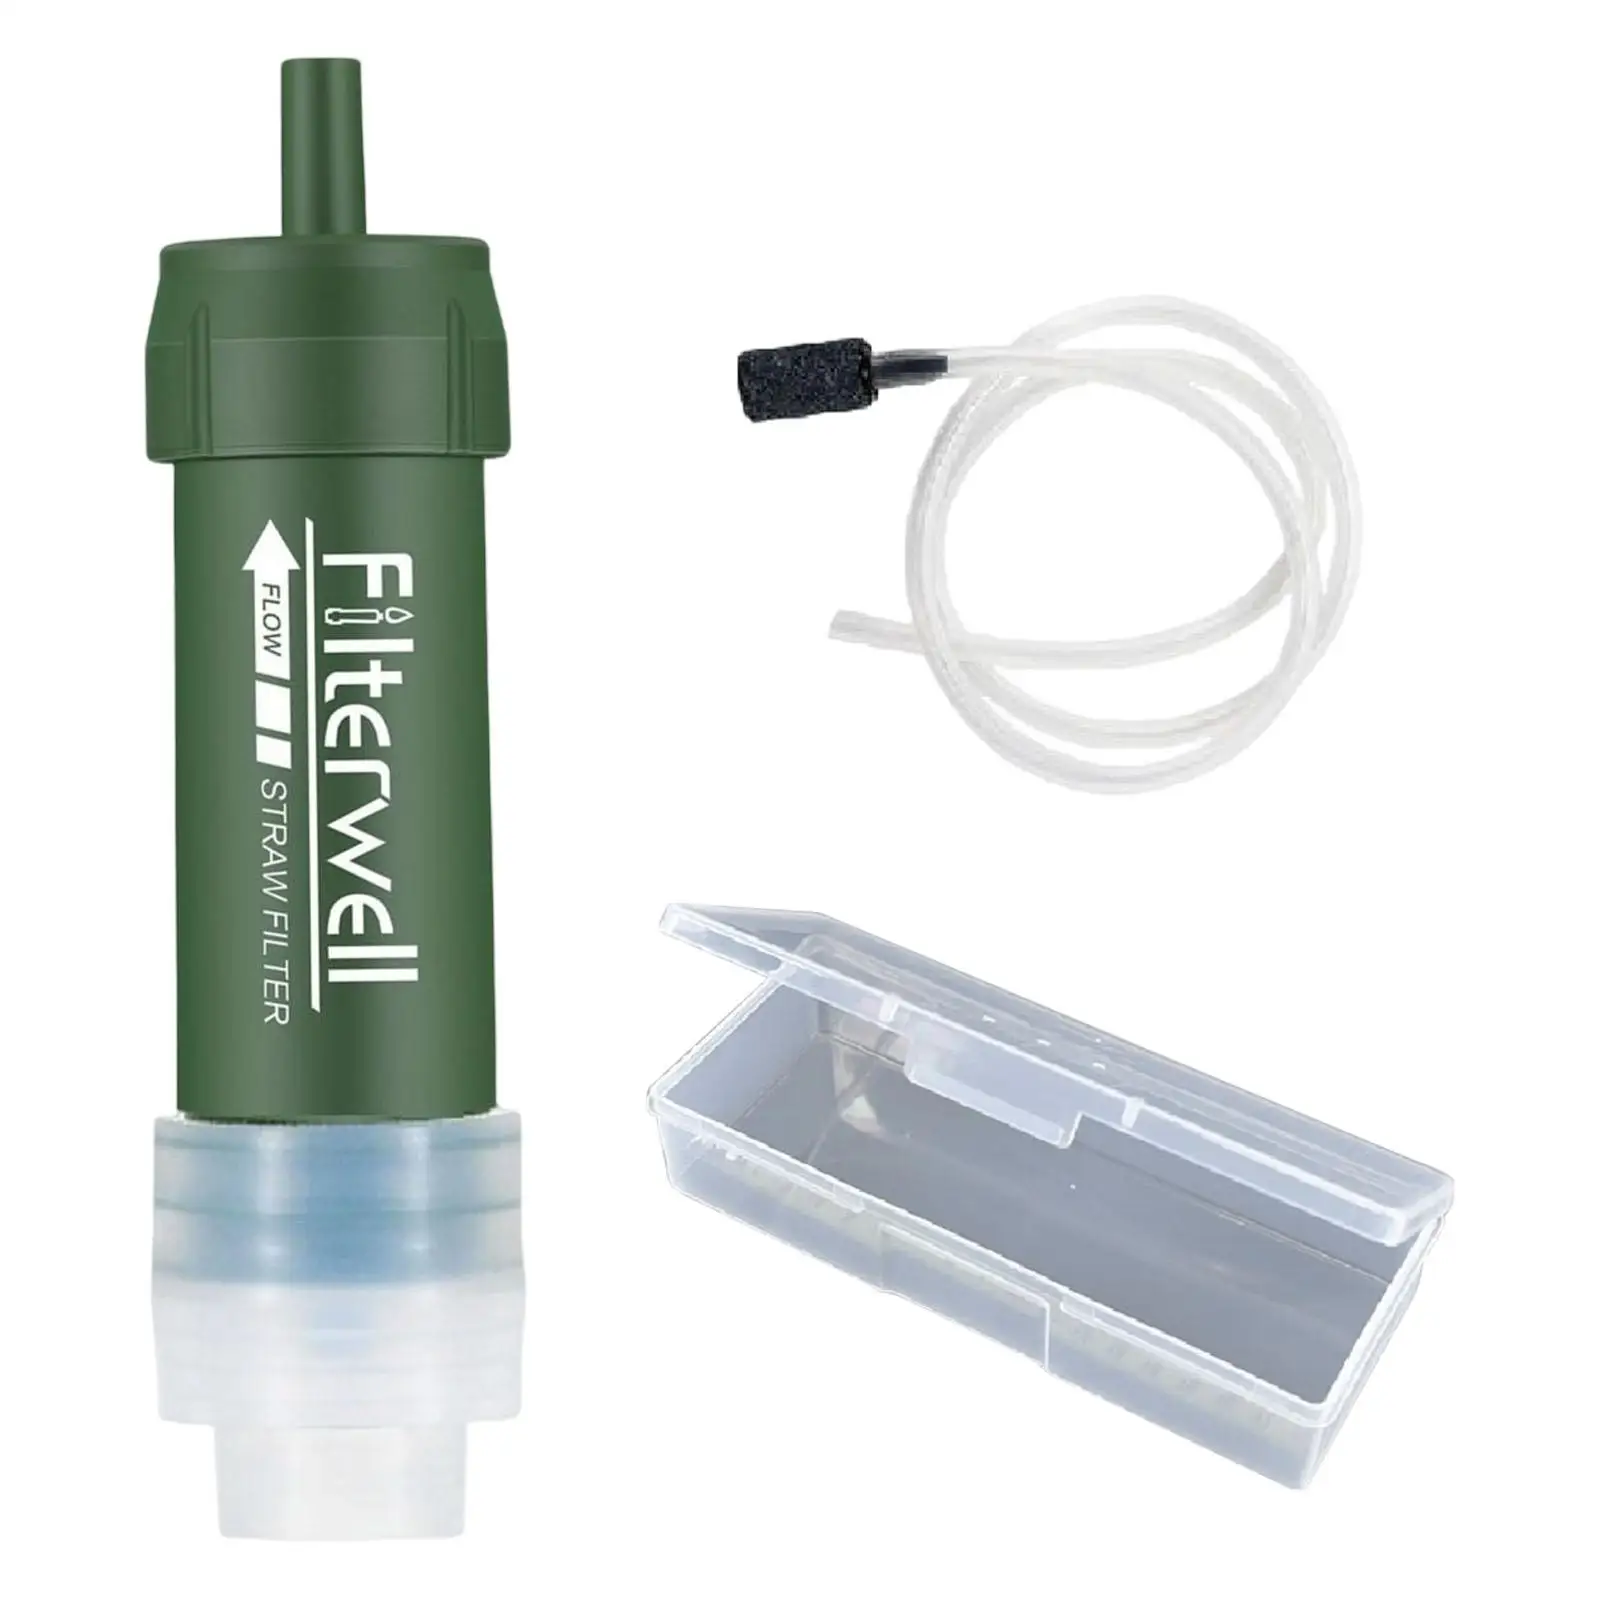 Personal Water Filter Straw Filtration System Purifier Camping Survival Water Purifying Device Drinking for Travelling Hiking